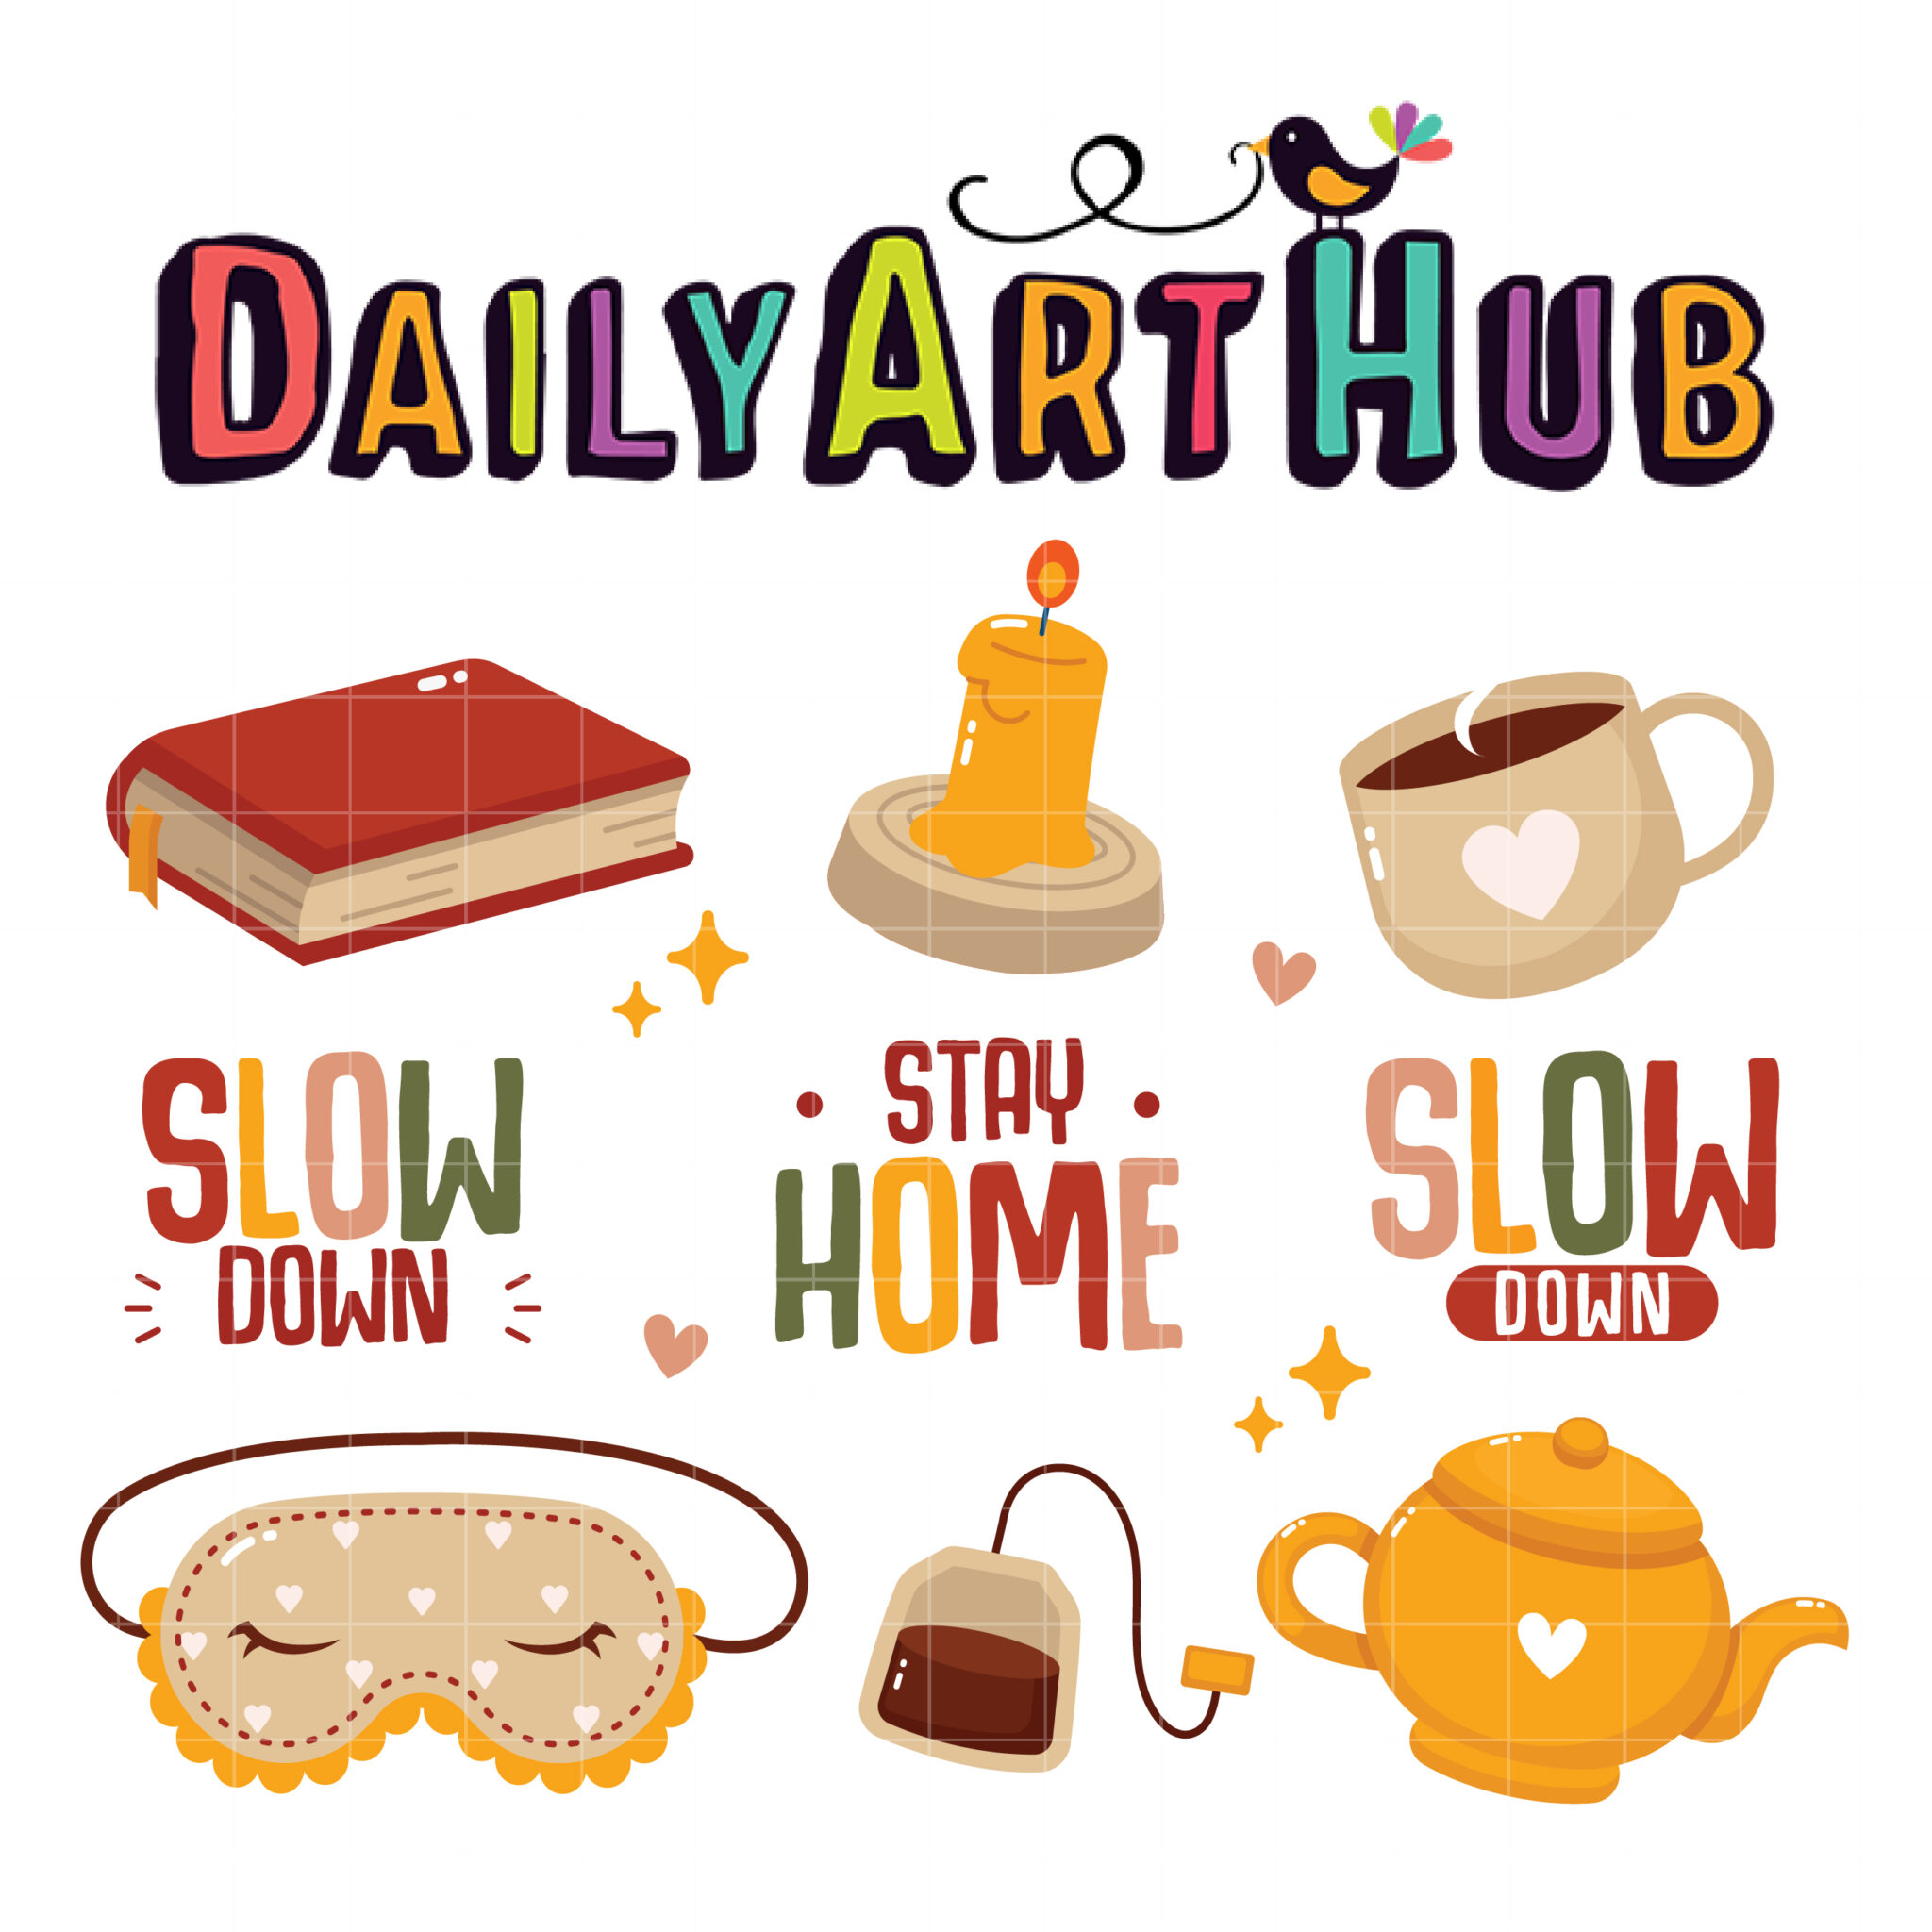 https://www.dailyarthub.com/wp-content/uploads/2020/12/Cute-Cozy-Collection-scaled.jpg